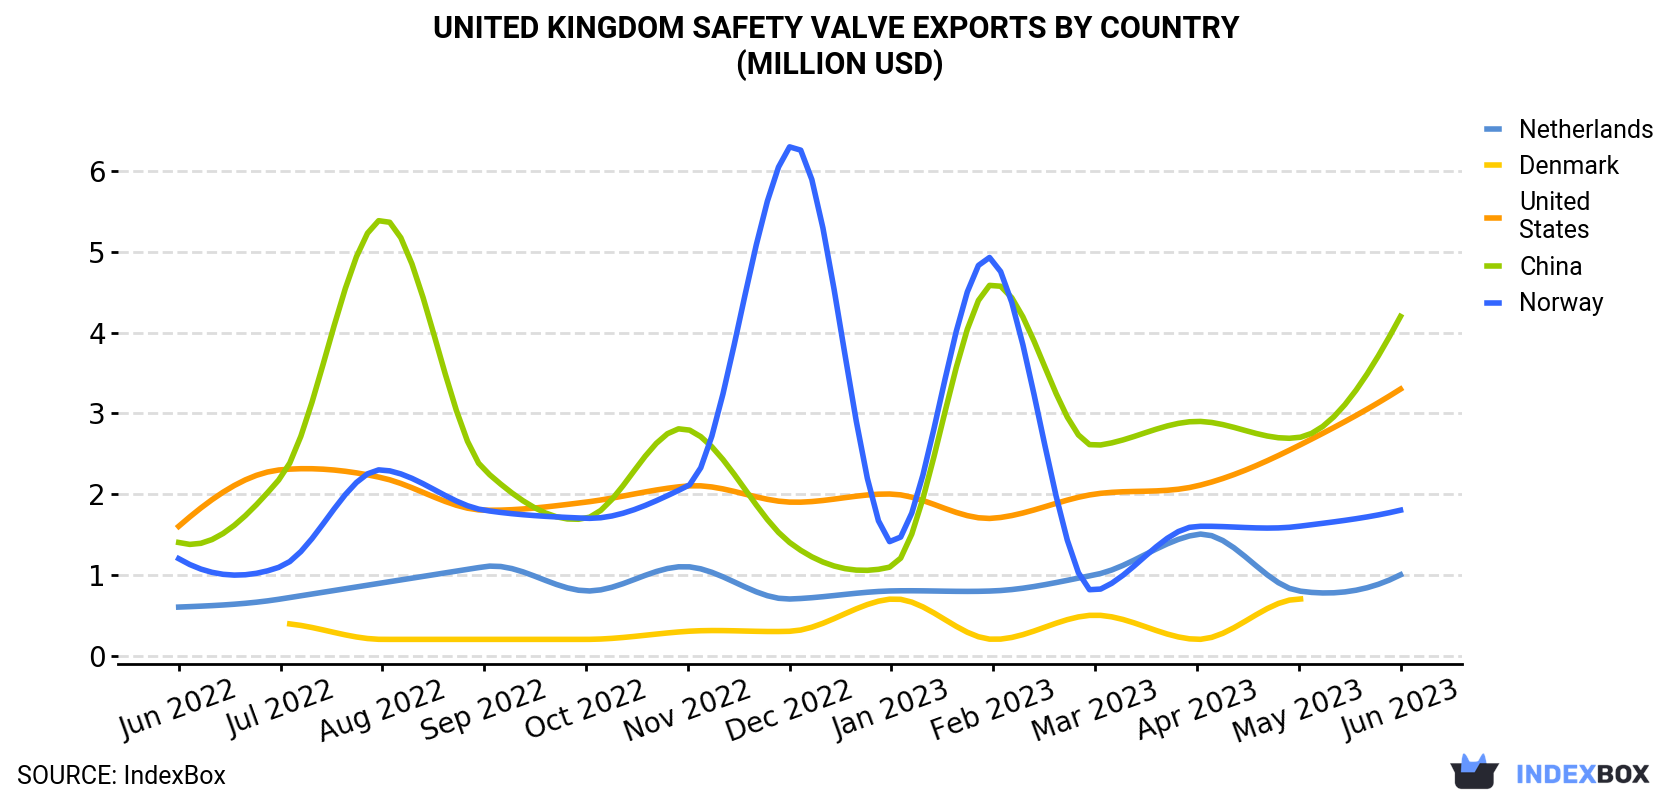 United Kingdom Safety Valve Exports By Country (Million USD)